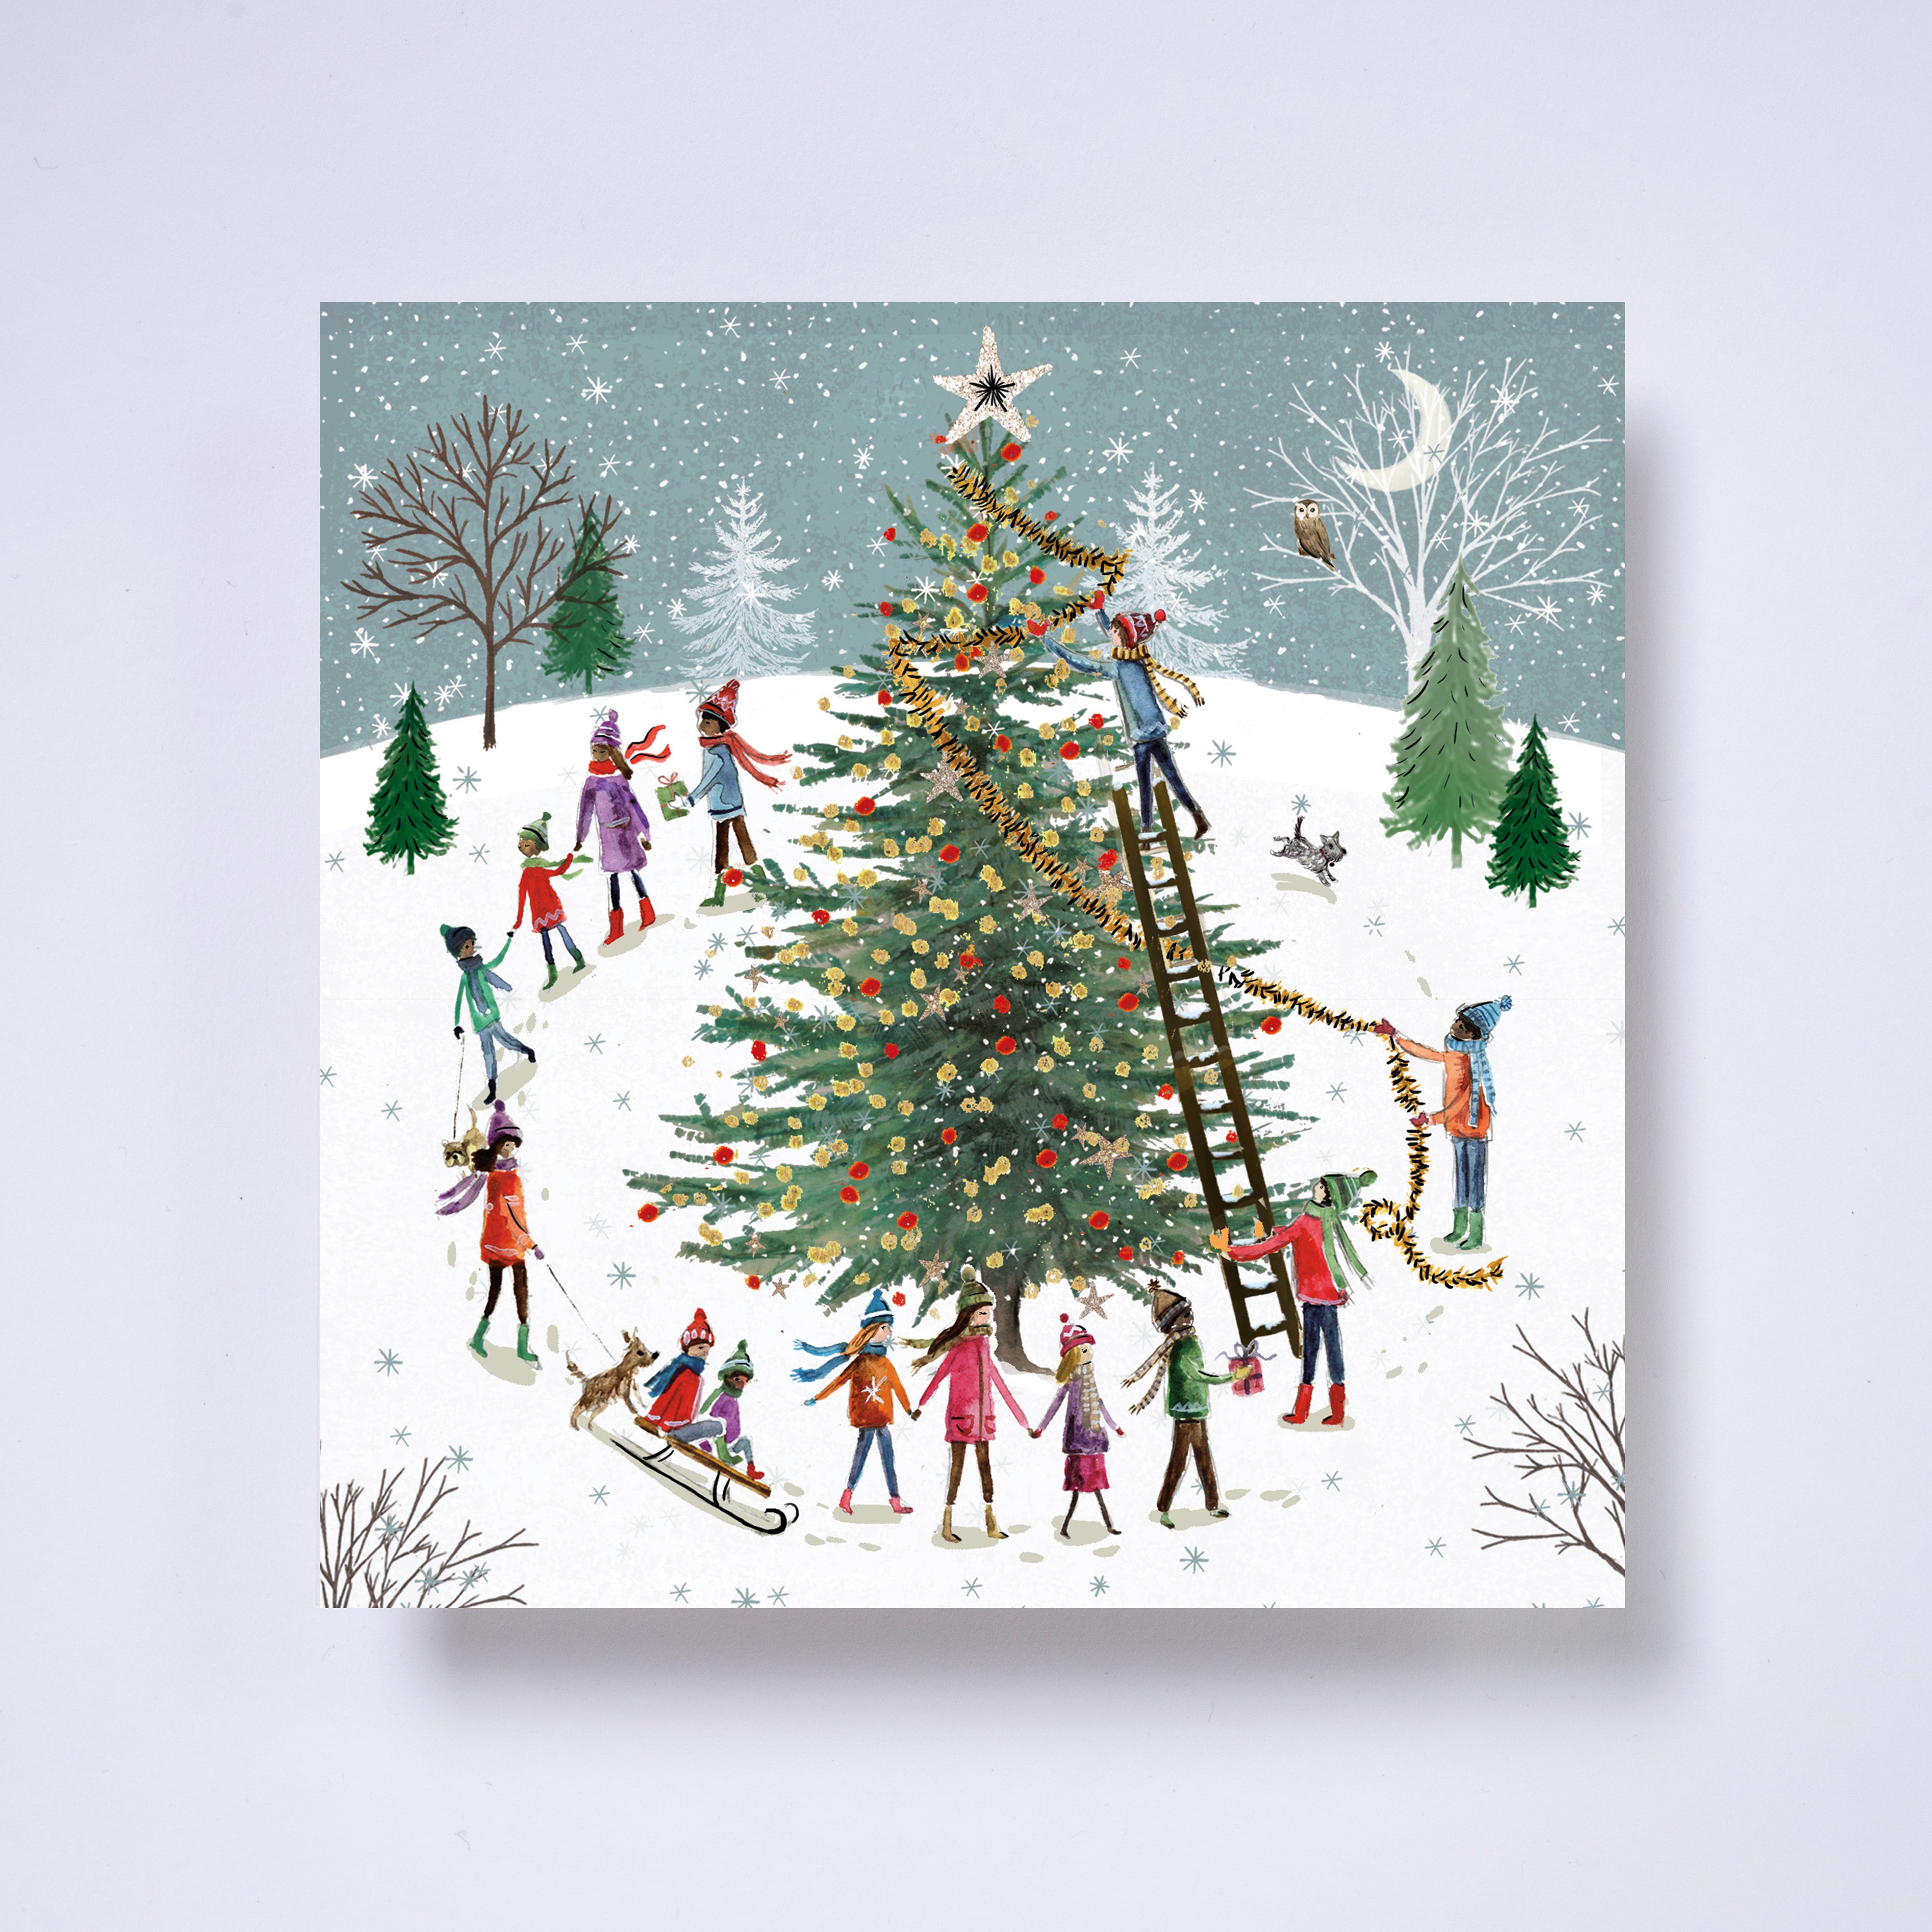 Around the tree - pack of 10 charity Christmas cards with envelopes